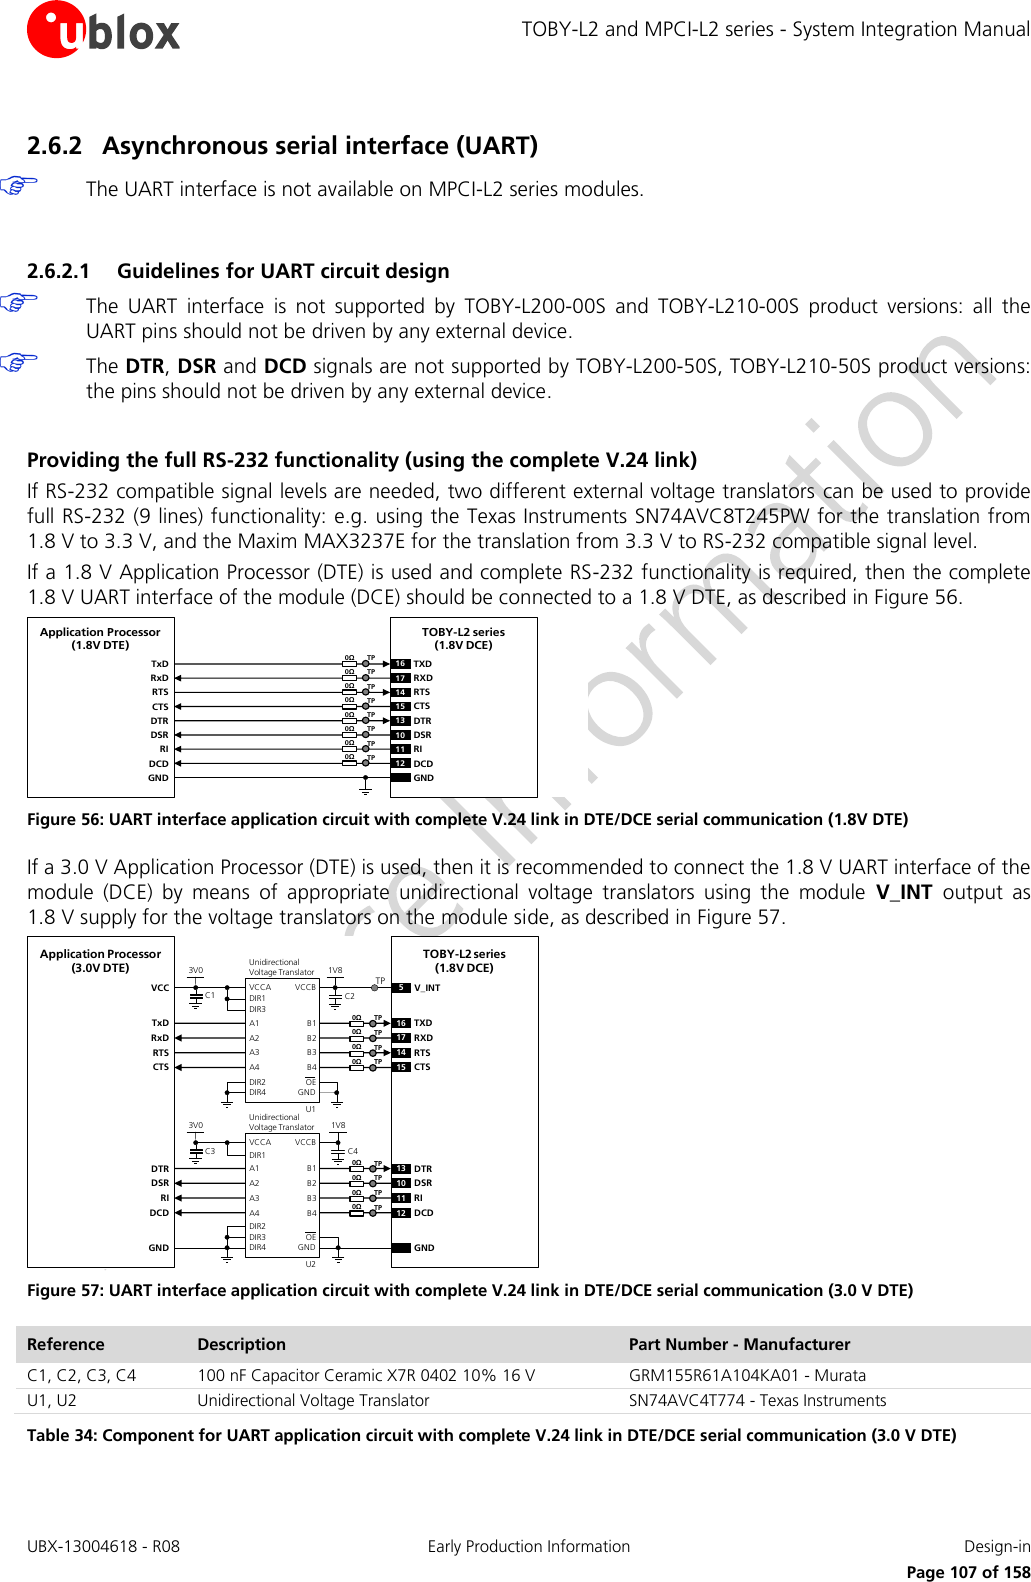 TOBY-L2 and MPCI-L2 series - System Integration Manual UBX-13004618 - R08  Early Production Information  Design-in     Page 107 of 158 2.6.2 Asynchronous serial interface (UART)  The UART interface is not available on MPCI-L2 series modules.  2.6.2.1 Guidelines for UART circuit design  The  UART  interface  is  not  supported  by  TOBY-L200-00S  and  TOBY-L210-00S  product  versions:  all  the UART pins should not be driven by any external device.  The DTR, DSR and DCD signals are not supported by TOBY-L200-50S, TOBY-L210-50S product versions: the pins should not be driven by any external device.  Providing the full RS-232 functionality (using the complete V.24 link) If RS-232 compatible signal levels are needed, two different external voltage translators  can be used to provide full RS-232 (9 lines) functionality: e.g. using the Texas Instruments SN74AVC8T245PW for the translation from 1.8 V to 3.3 V, and the Maxim MAX3237E for the translation from 3.3 V to RS-232 compatible signal level. If a 1.8 V Application Processor (DTE) is used and complete RS-232 functionality is required, then the complete 1.8 V UART interface of the module (DCE) should be connected to a 1.8 V DTE, as described in Figure 56. TxDApplication Processor(1.8V DTE)RxDRTSCTSDTRDSRRIDCDGNDTOBY-L2 series (1.8V DCE)16 TXD13 DTR17 RXD14 RTS15 CTS10 DSR11 RI12 DCDGND0ΩTP0ΩTP0ΩTP0ΩTP0ΩTP0ΩTP0ΩTP0ΩTP Figure 56: UART interface application circuit with complete V.24 link in DTE/DCE serial communication (1.8V DTE) If a 3.0 V Application Processor (DTE) is used, then it is recommended to connect the 1.8 V UART interface of the module  (DCE)  by  means  of  appropriate  unidirectional  voltage  translators  using  the  module  V_INT  output  as 1.8 V supply for the voltage translators on the module side, as described in Figure 57. 5V_INTTxDApplication Processor(3.0V DTE)RxDRTSCTSDTRDSRRIDCDGNDTOBY-L2 series (1.8V DCE)16 TXD13 DTR17 RXD14 RTS15 CTS10 DSR11 RI12 DCDGND1V8B1 A1GNDU1B3A3VCCBVCCAUnidirectionalVoltage TranslatorC1 C23V0DIR3DIR2 OEDIR1VCCB2 A2B4A4DIR41V8B1 A1GNDU2B3A3VCCBVCCAUnidirectionalVoltage TranslatorC3 C43V0DIR1DIR3 OEB2 A2B4A4DIR4DIR2TP0ΩTP0ΩTP0ΩTP0ΩTP0ΩTP0ΩTP0ΩTP0ΩTP Figure 57: UART interface application circuit with complete V.24 link in DTE/DCE serial communication (3.0 V DTE) Reference Description Part Number - Manufacturer C1, C2, C3, C4 100 nF Capacitor Ceramic X7R 0402 10% 16 V GRM155R61A104KA01 - Murata U1, U2 Unidirectional Voltage Translator SN74AVC4T774 - Texas Instruments Table 34: Component for UART application circuit with complete V.24 link in DTE/DCE serial communication (3.0 V DTE) 